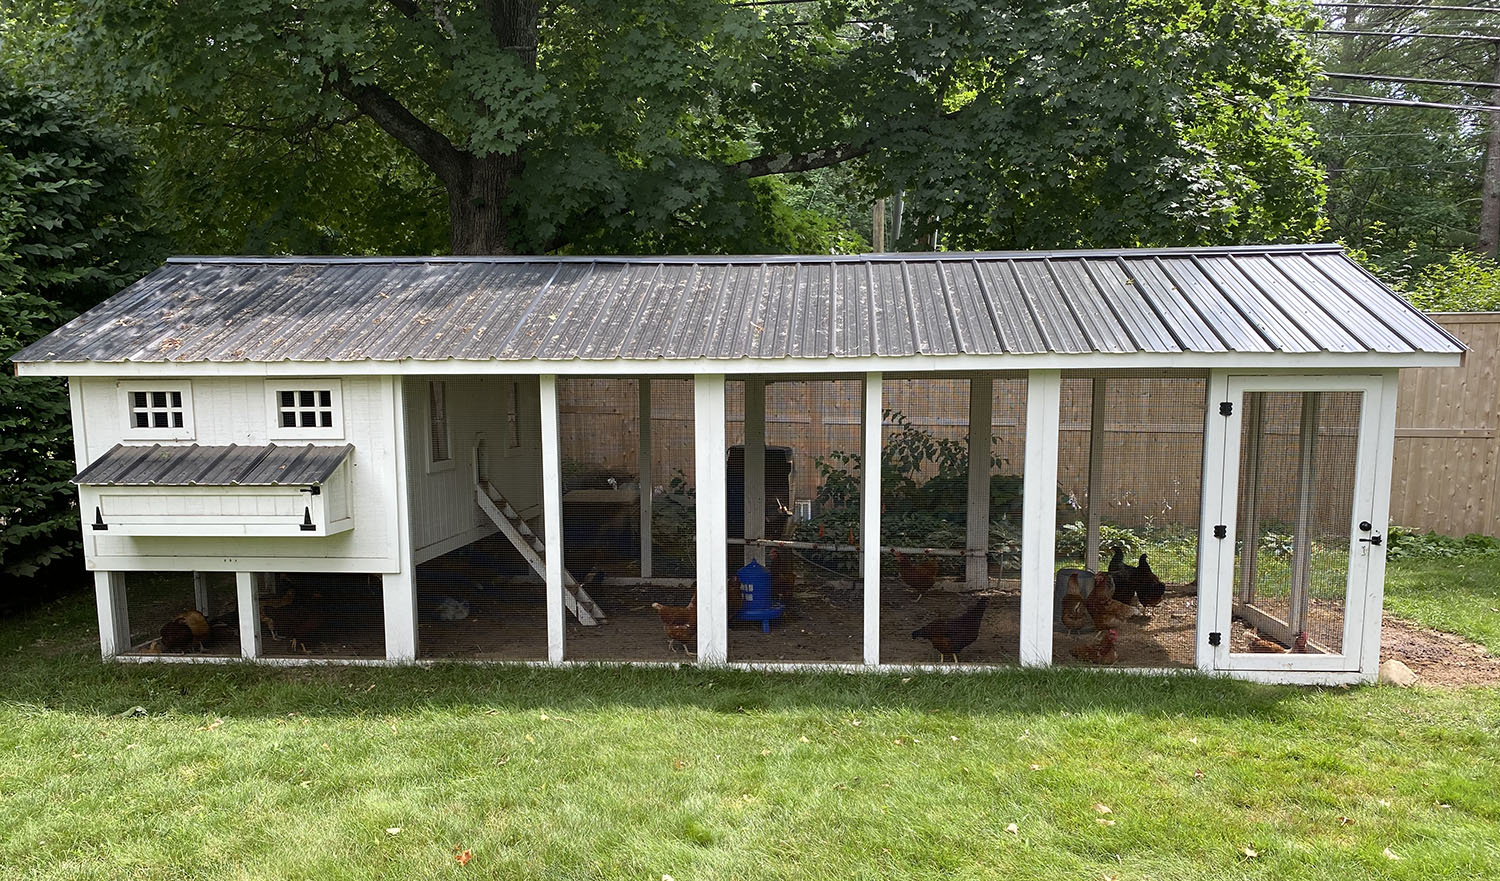 10’x24′ Carolina Coop in Peterborough, NH with sandwiched walls and gutters and rain barrel poultry water system